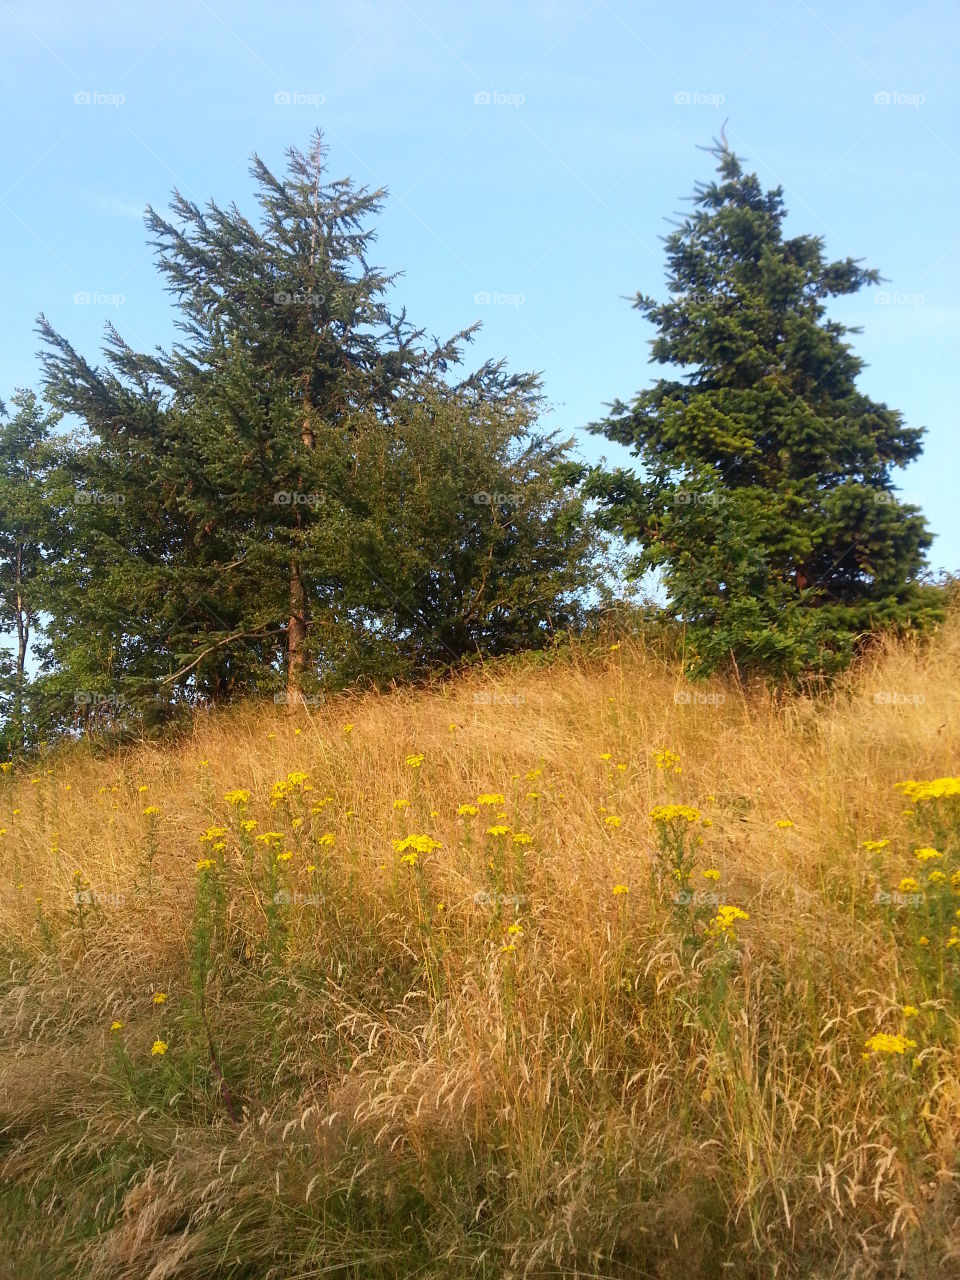 Trees on a grassy bank in late summer